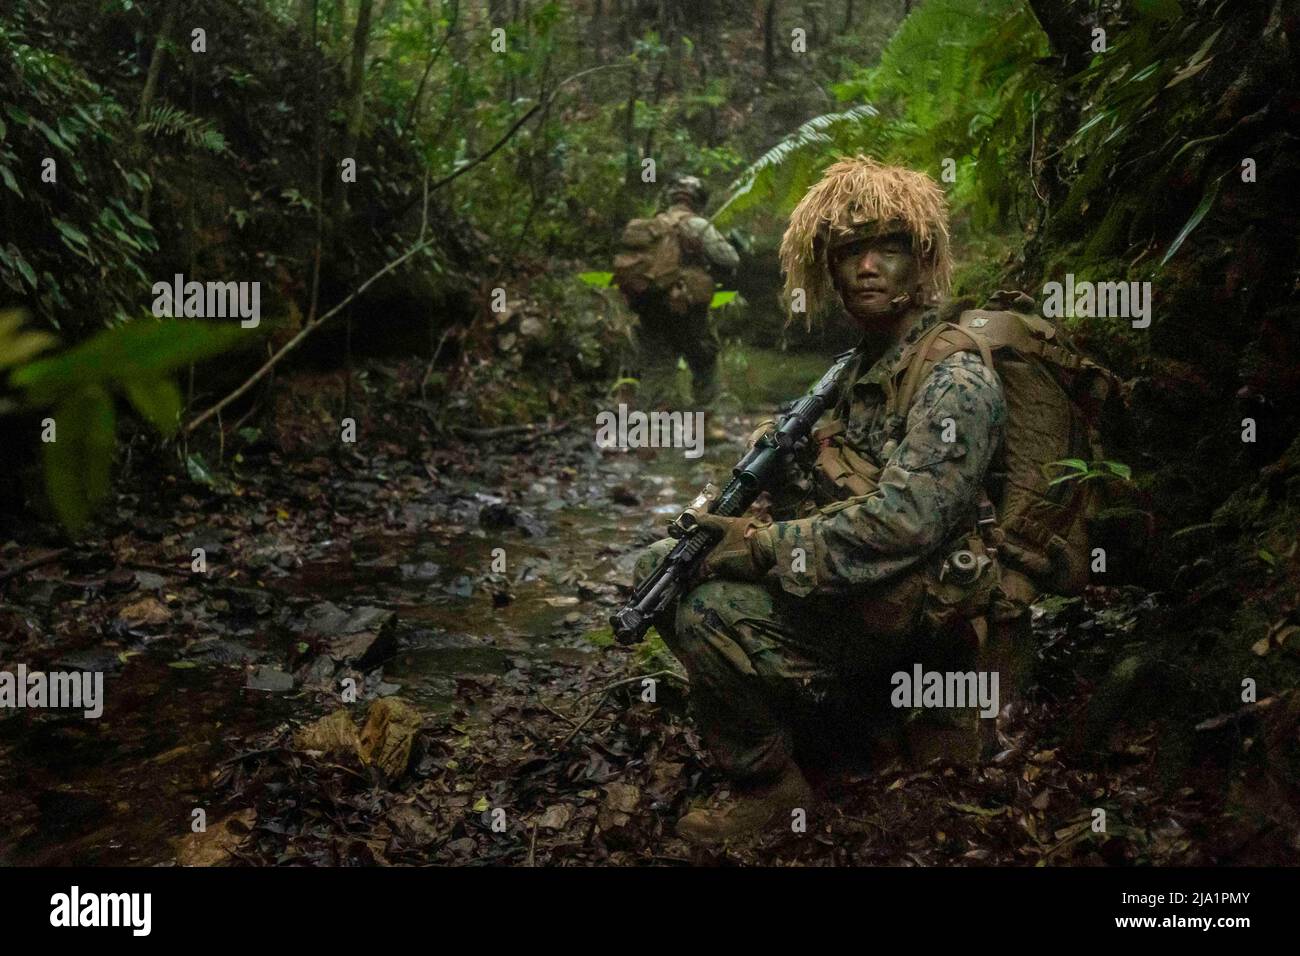 Okinawa, Japan. 11th May, 2022. U.S. Marine Corps Cpl. Daehong Kang, a rifleman with 3d Battalion, 2d Marines, provides security during Counter Assault Exercise on Okinawa, Japan, May 11, 2022. During this force-on-force exercise, an infantry company with 3/2 rapidly deployed into the double-canopy jungles of the Northern Training Area to defend against an assault from another infantry company with 1st Battalion, 3d Marines. This exercise was designed to increase 3d Marine Division's ability to seize and defend key maritime terrain, such as islands or coastal areas, and conduct Expeditionary Stock Photo